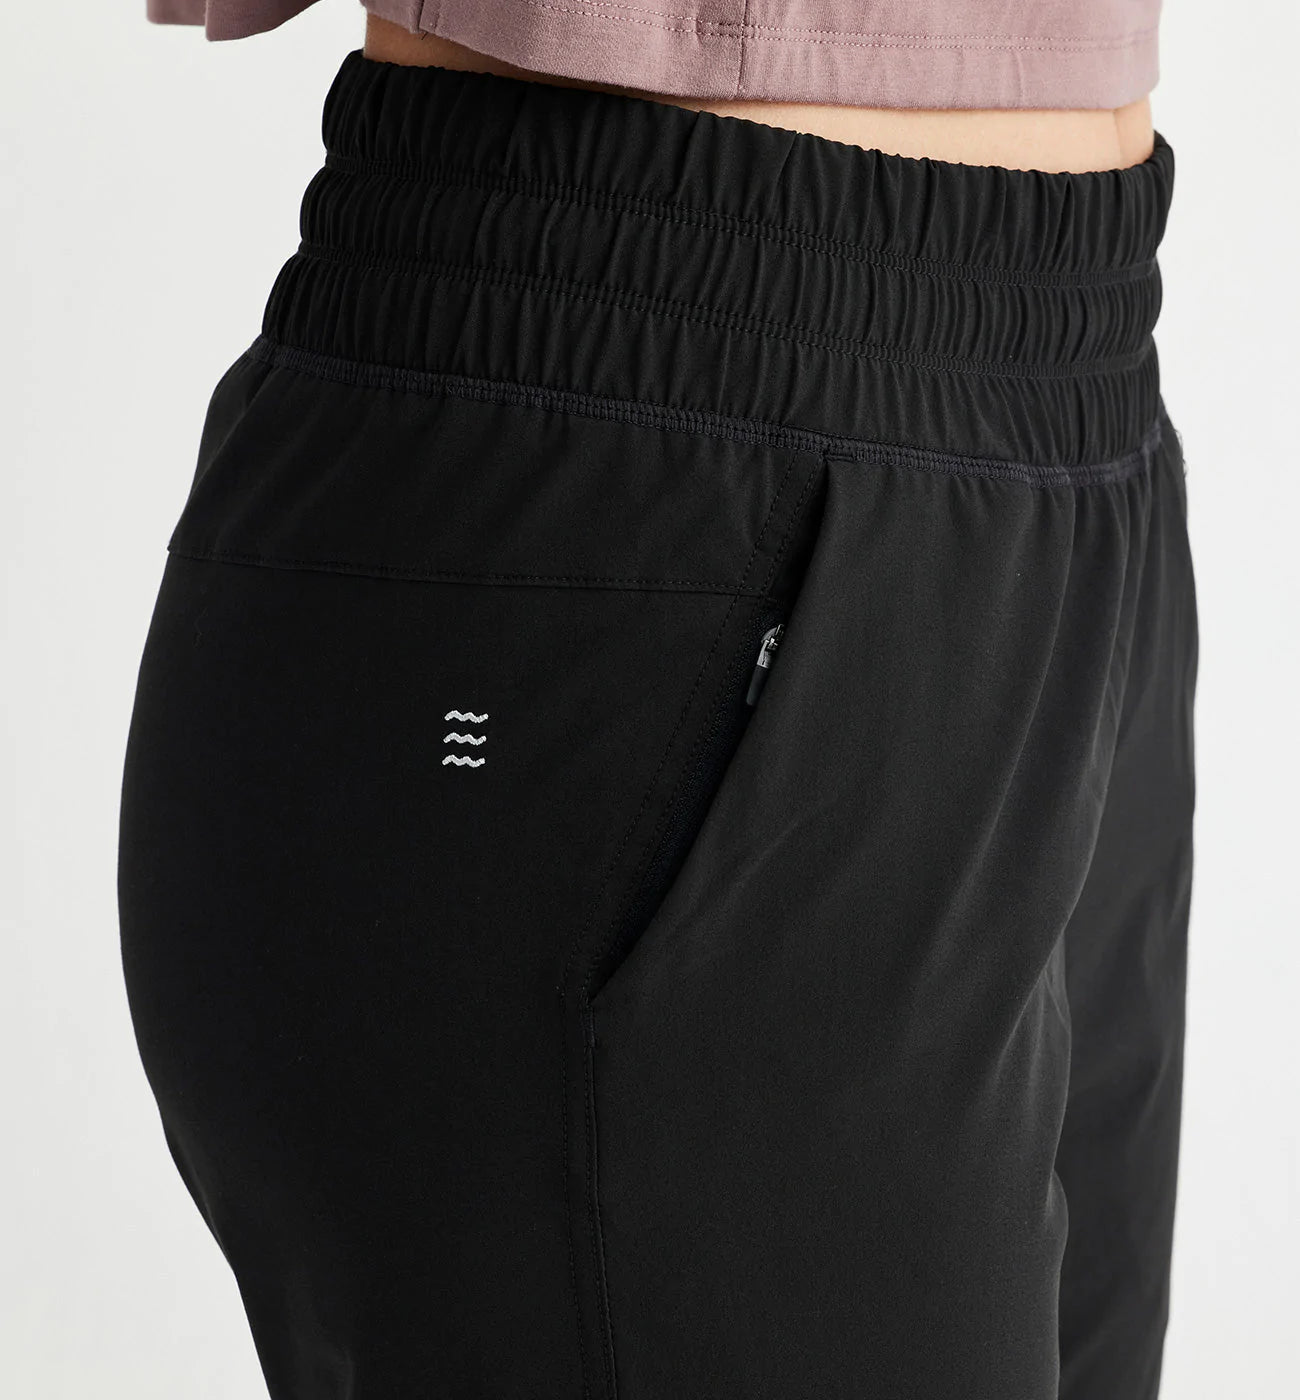 Balloon Joggers Clothing in Black - Get great deals at JustFab